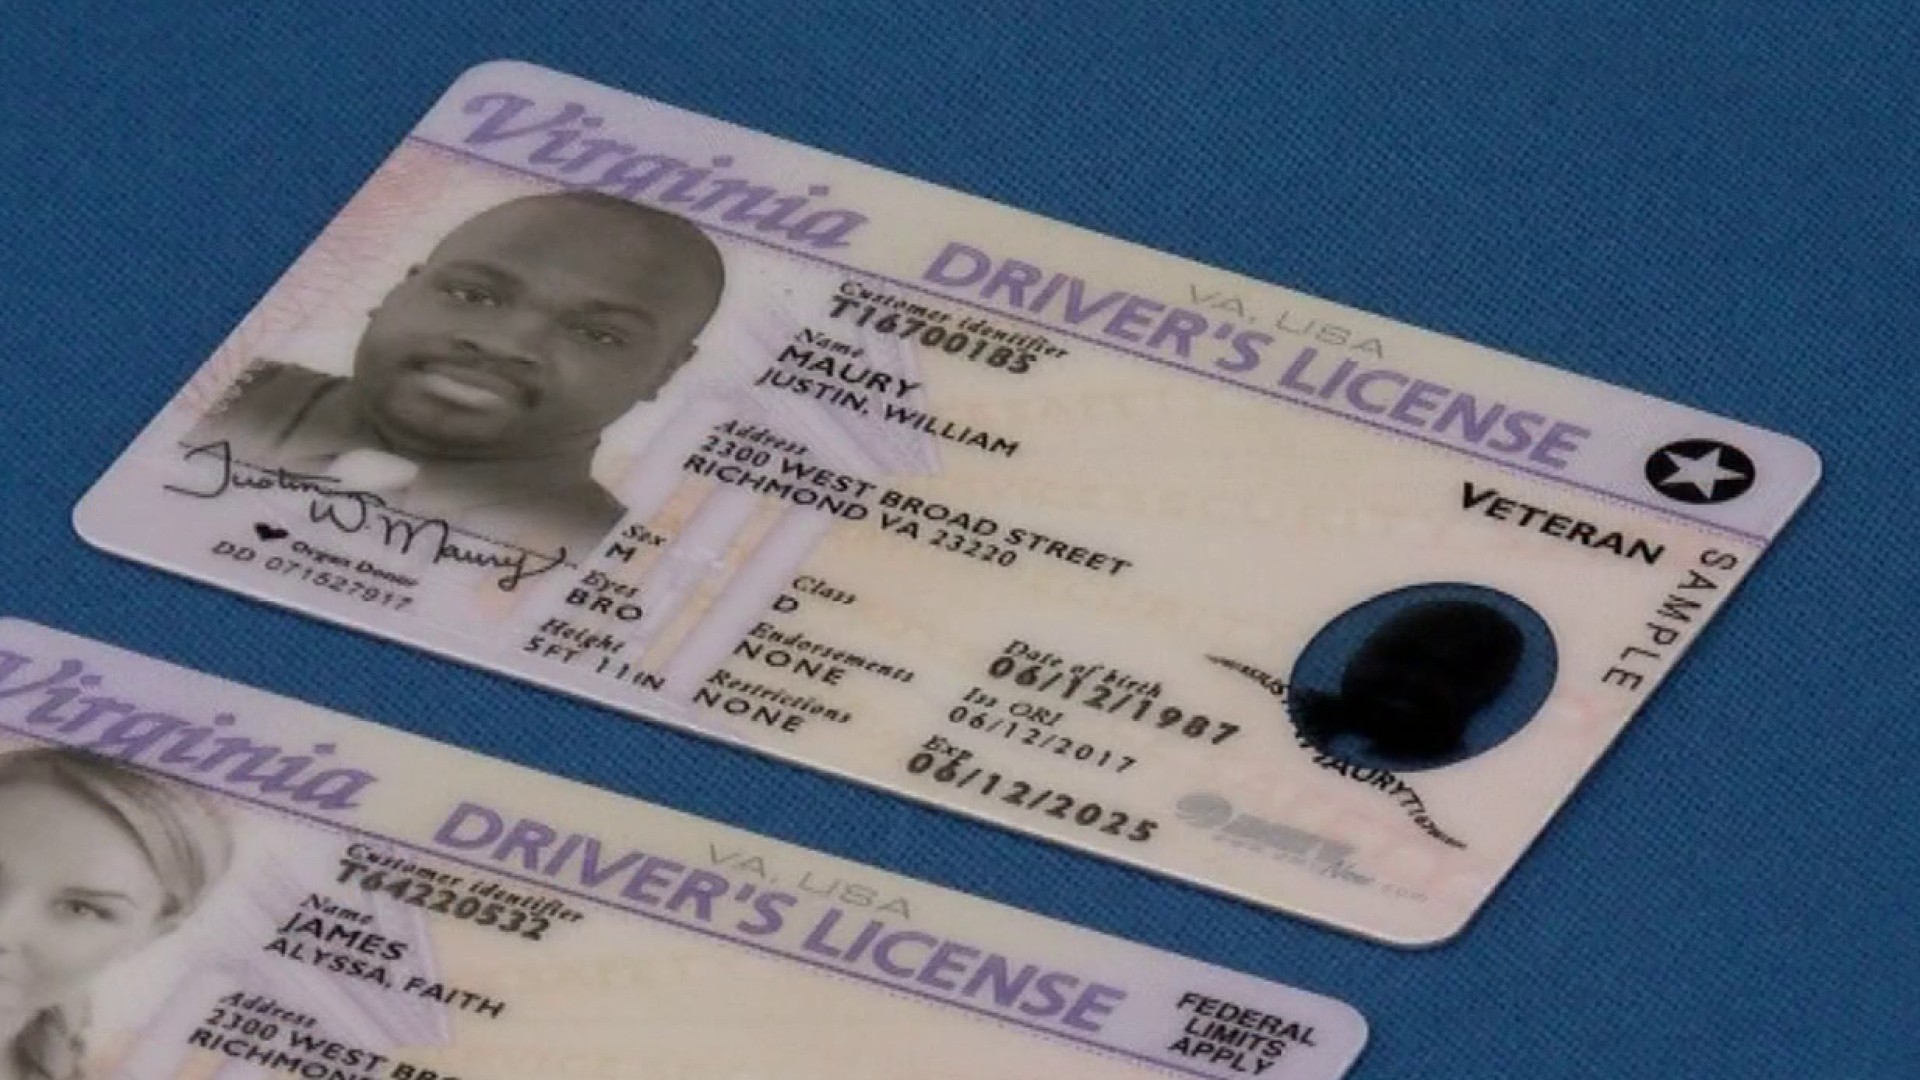 Virginia driver's license, ID card get new looks